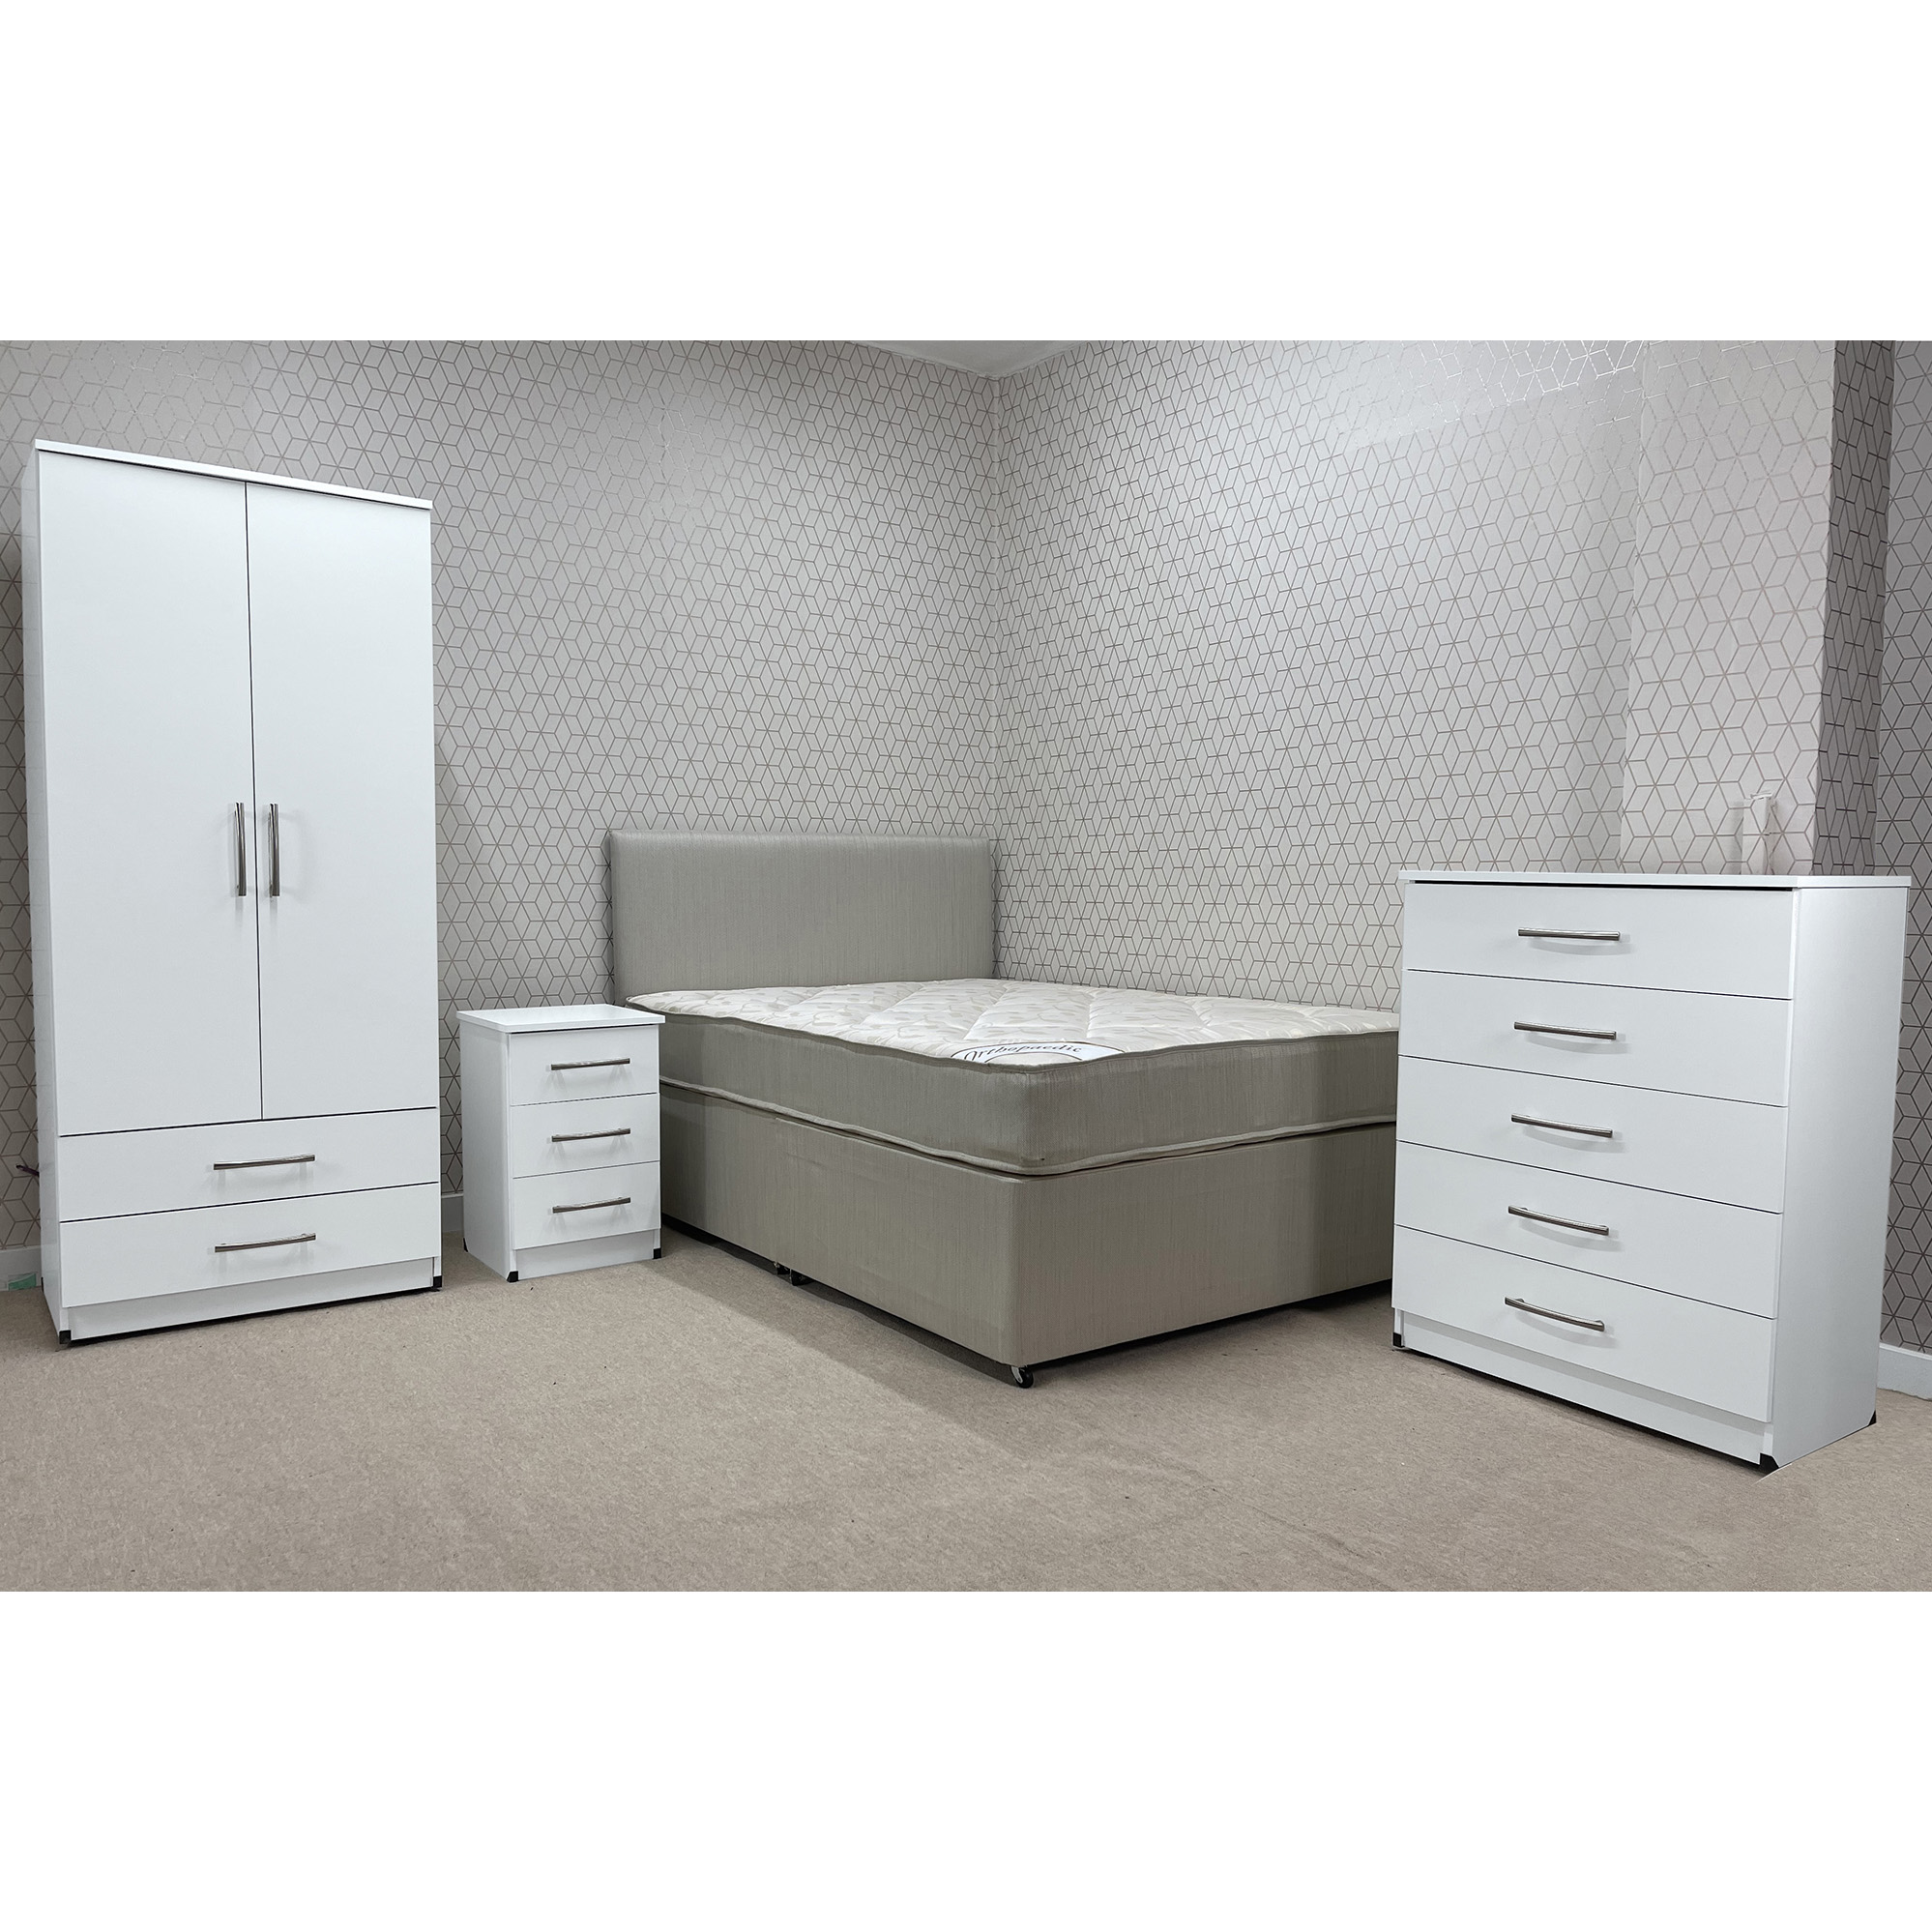 hmo furniture package landlord furniture package 7d